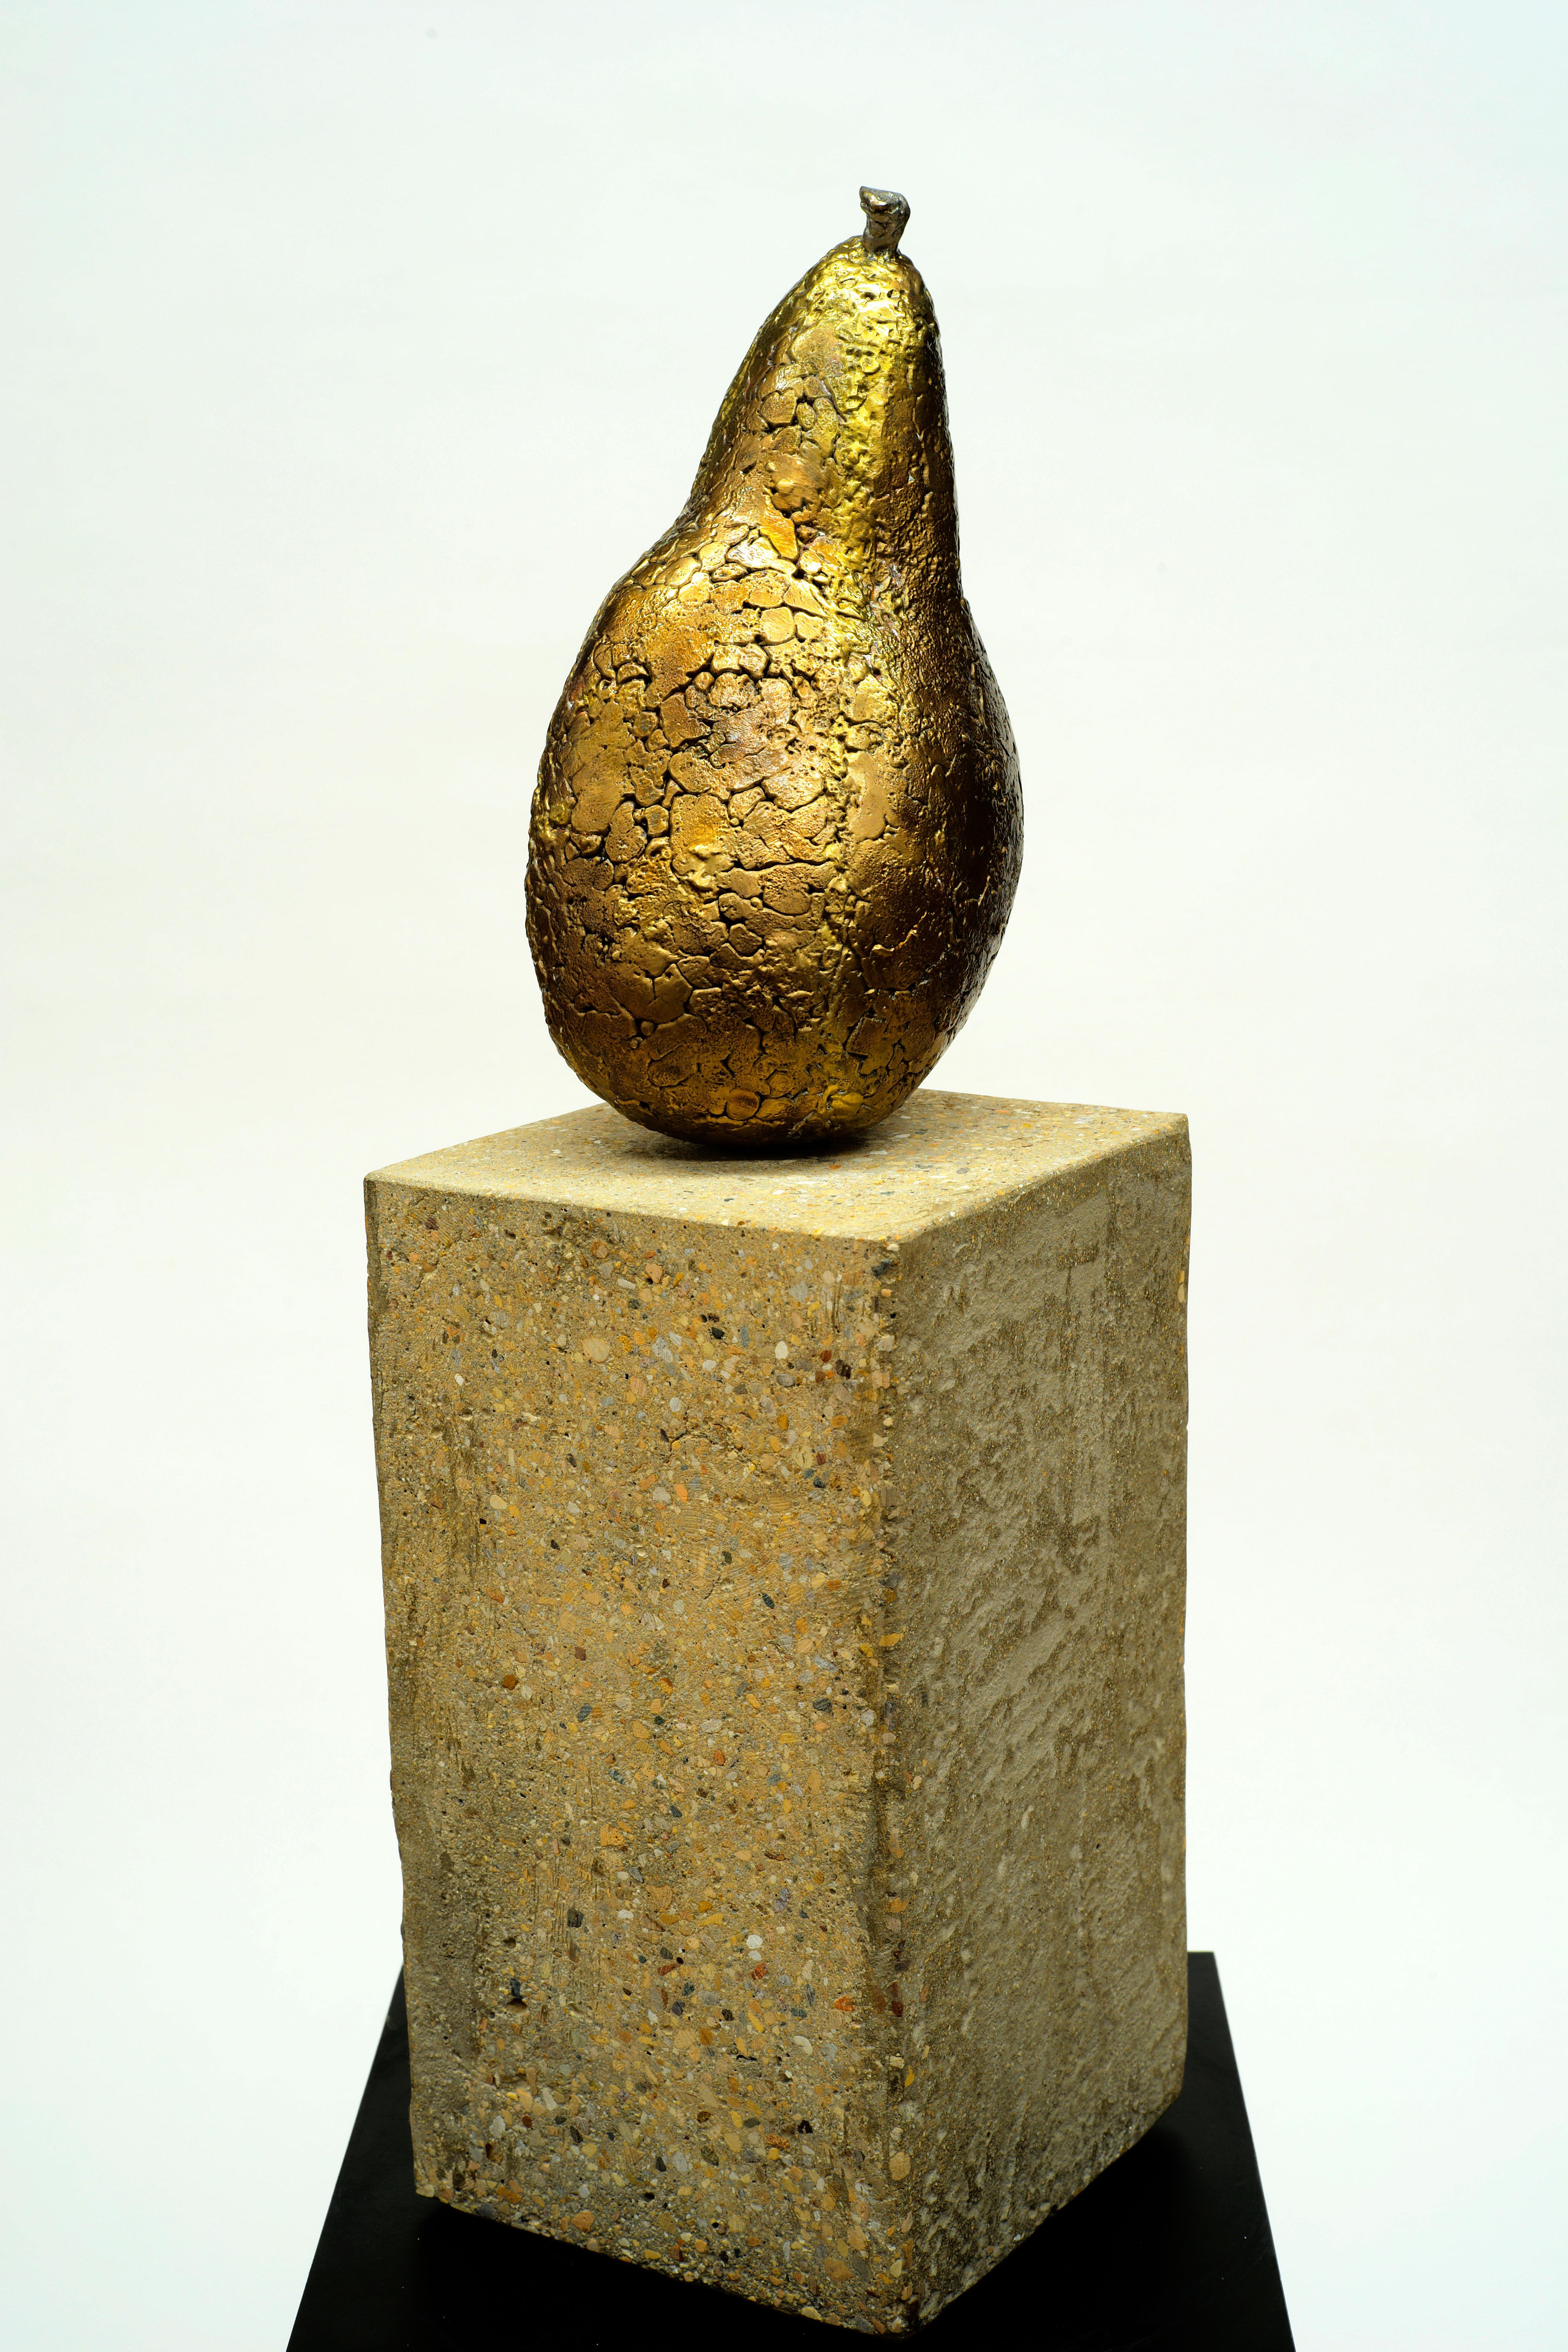 North American Autumn Pear, Bronze Sculpture with Textured Golden Surface on Concrete Base For Sale